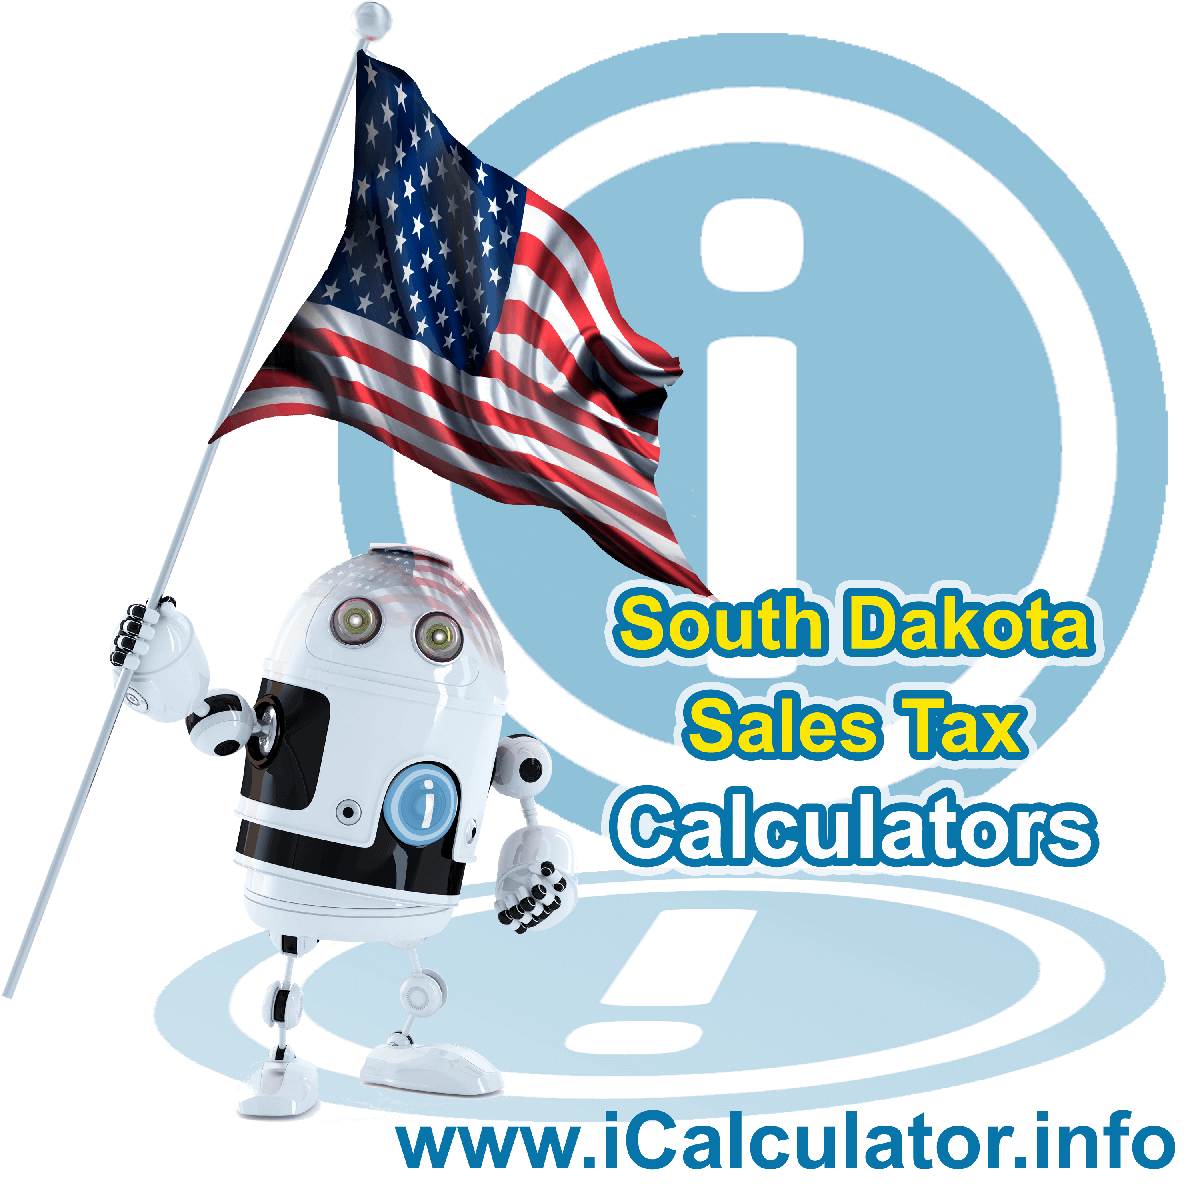 South Dakota Sales Tax Comparison Calculator: This image illustrates a calculator robot comparing sales tax in South Dakota manually using the South Dakota Sales Tax Formula. You can use this information to compare Sales Tax manually or use the South Dakota Sales Tax Comparison Calculator to calculate and compare South Dakota sales tax online.